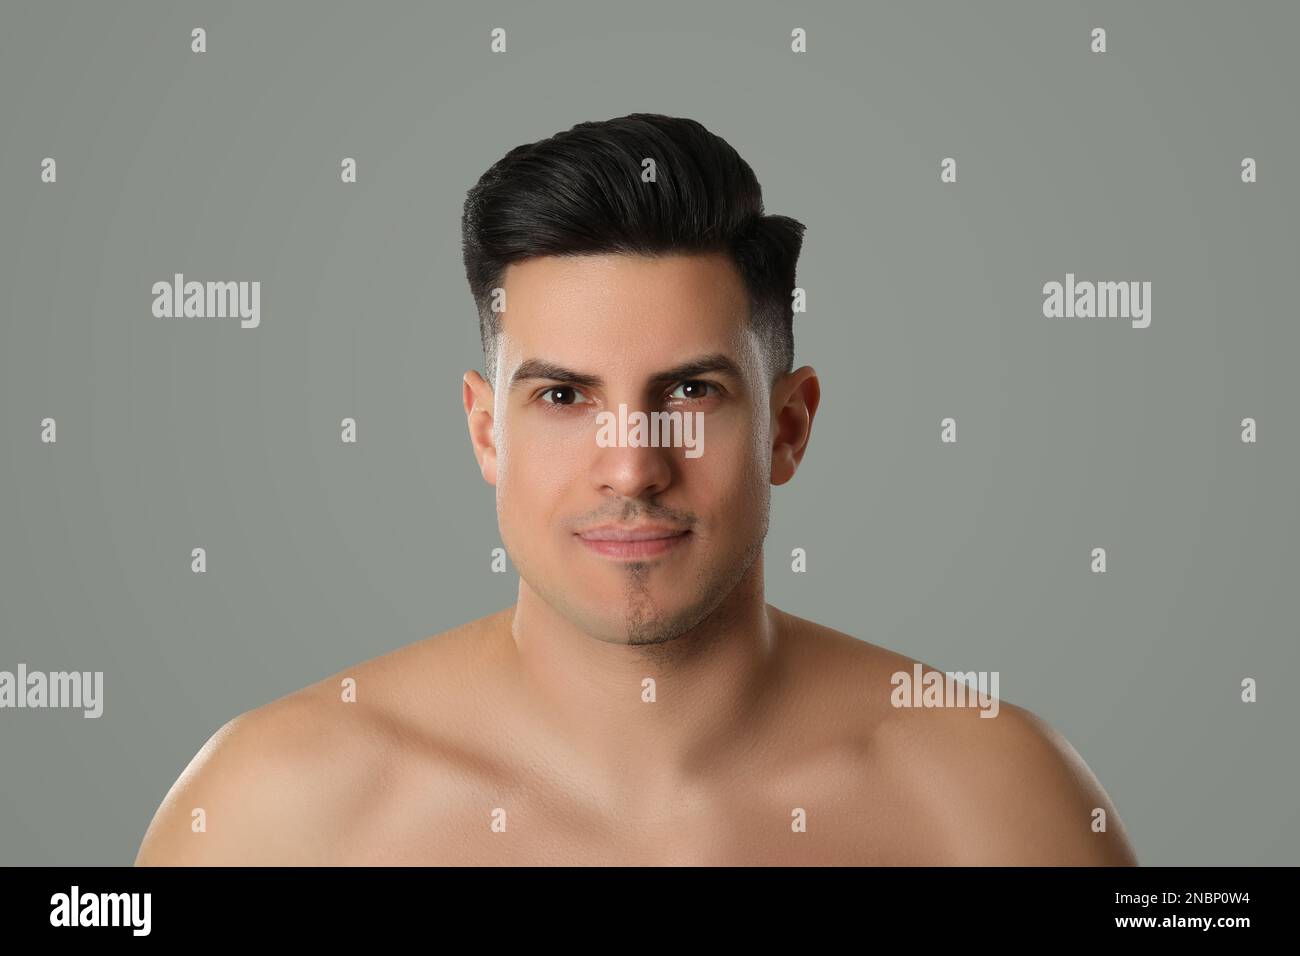 Handsome man with half shaved face on grey background Stock Photo